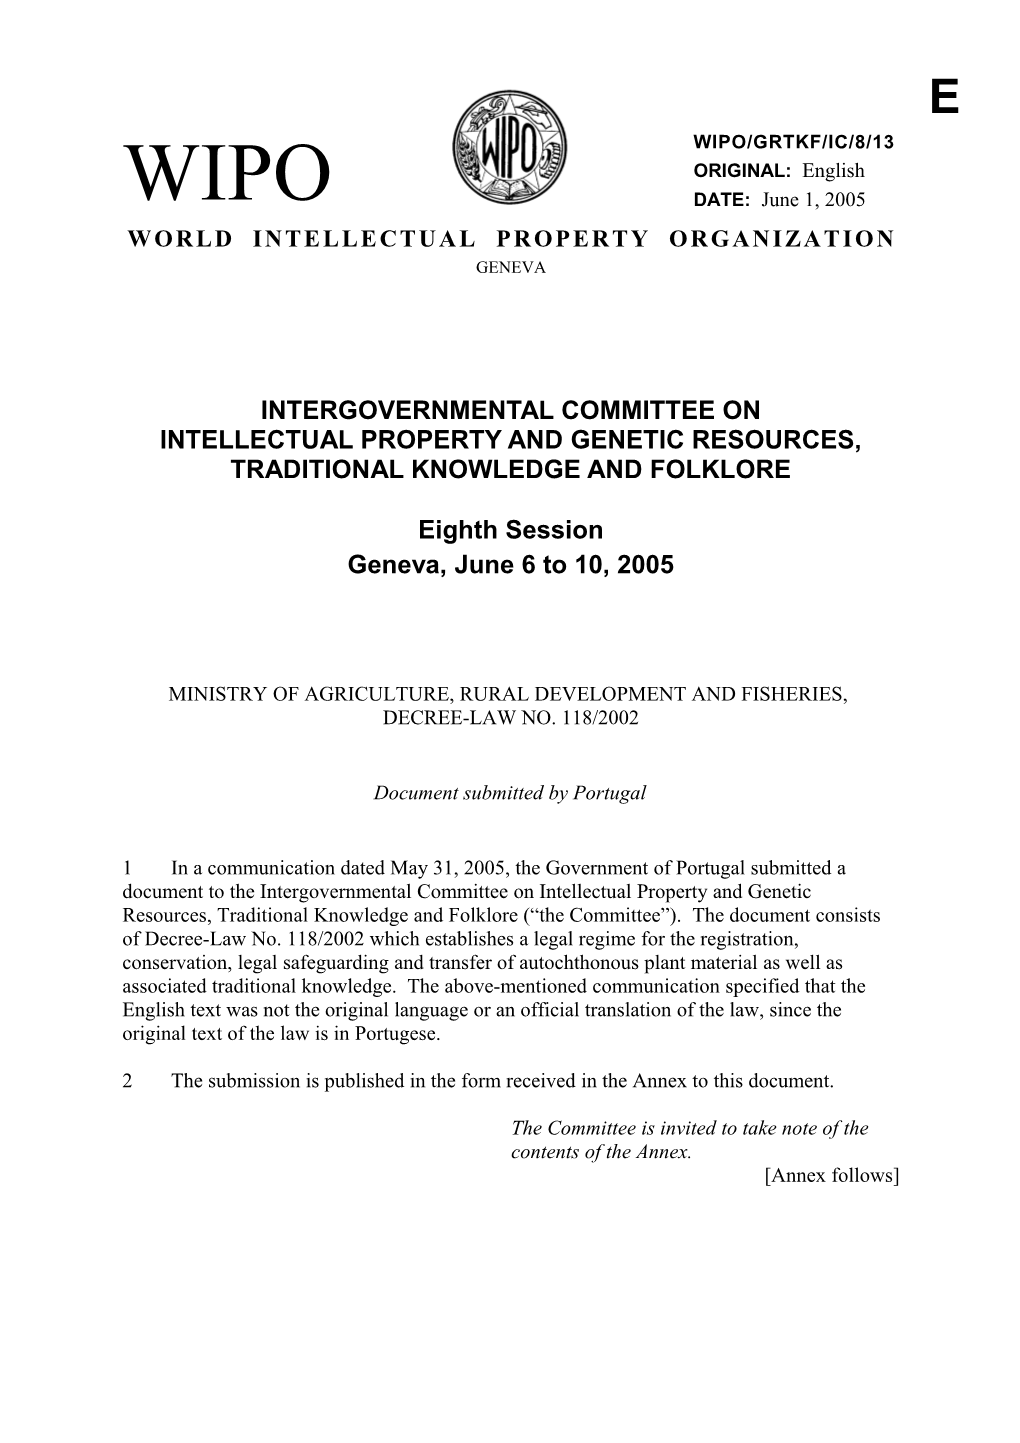 WIPO/GRTKF/IC/8/13: Ministry of Agriculture, Rural Development and Fisheries, Decree-Law